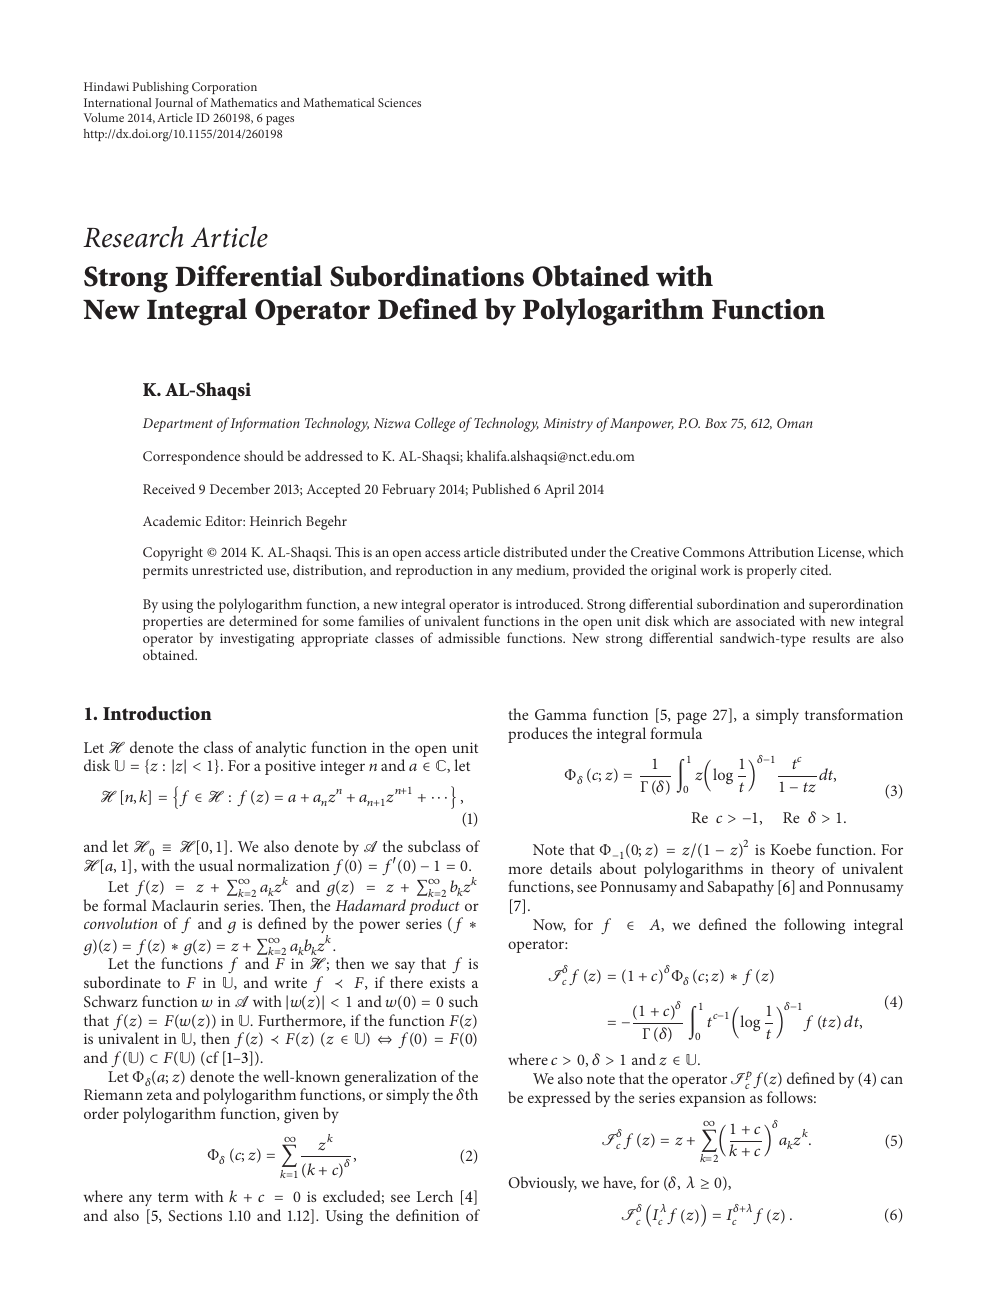 Strong Differential Subordinations Obtained With New Integral Operator Defined By Polylogarithm Function Topic Of Research Paper In Mathematics Download Scholarly Article Pdf And Read For Free On Cyberleninka Open Science Hub